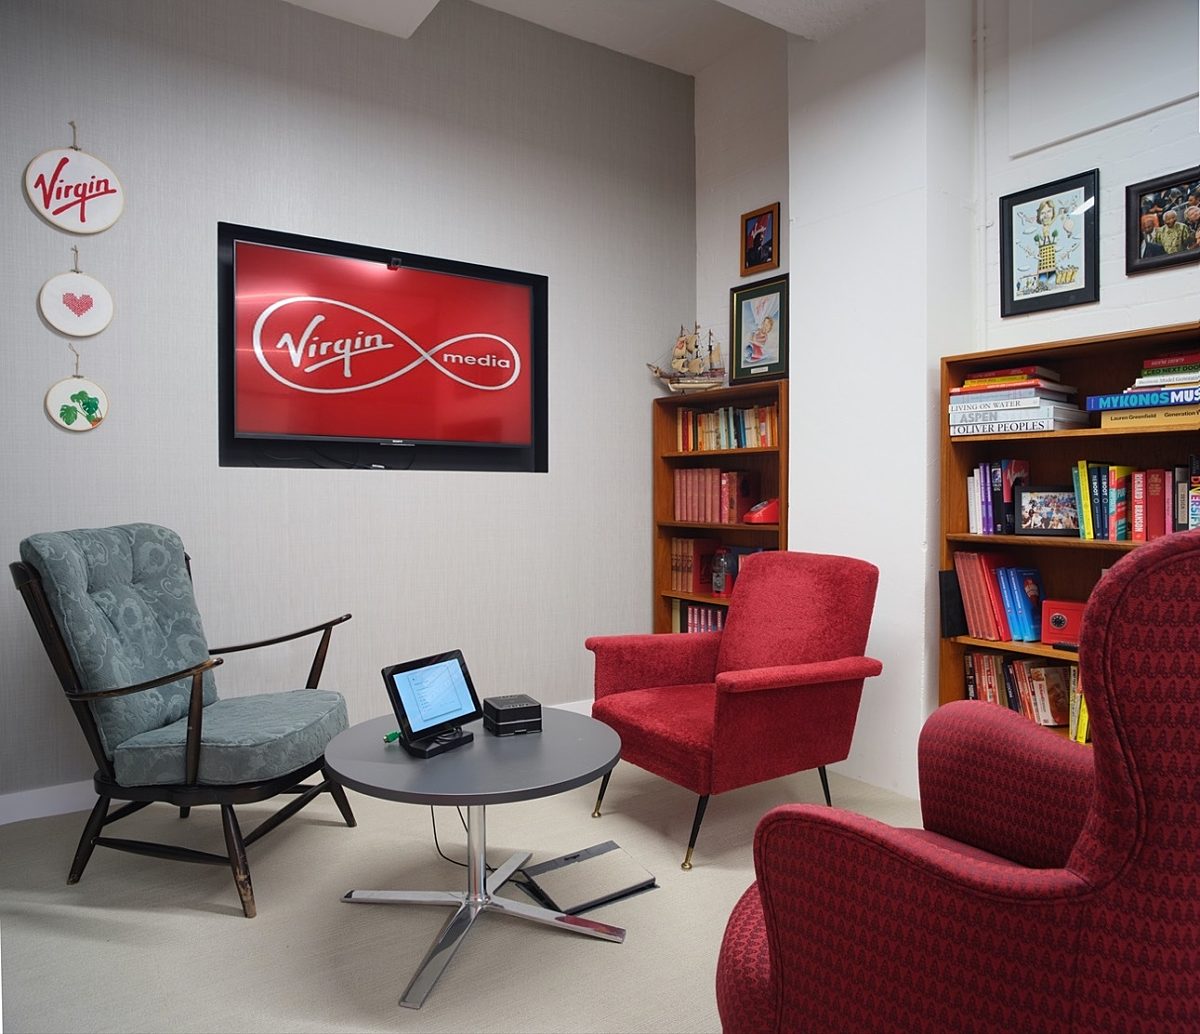 Virgin Red chairs in meeting room design